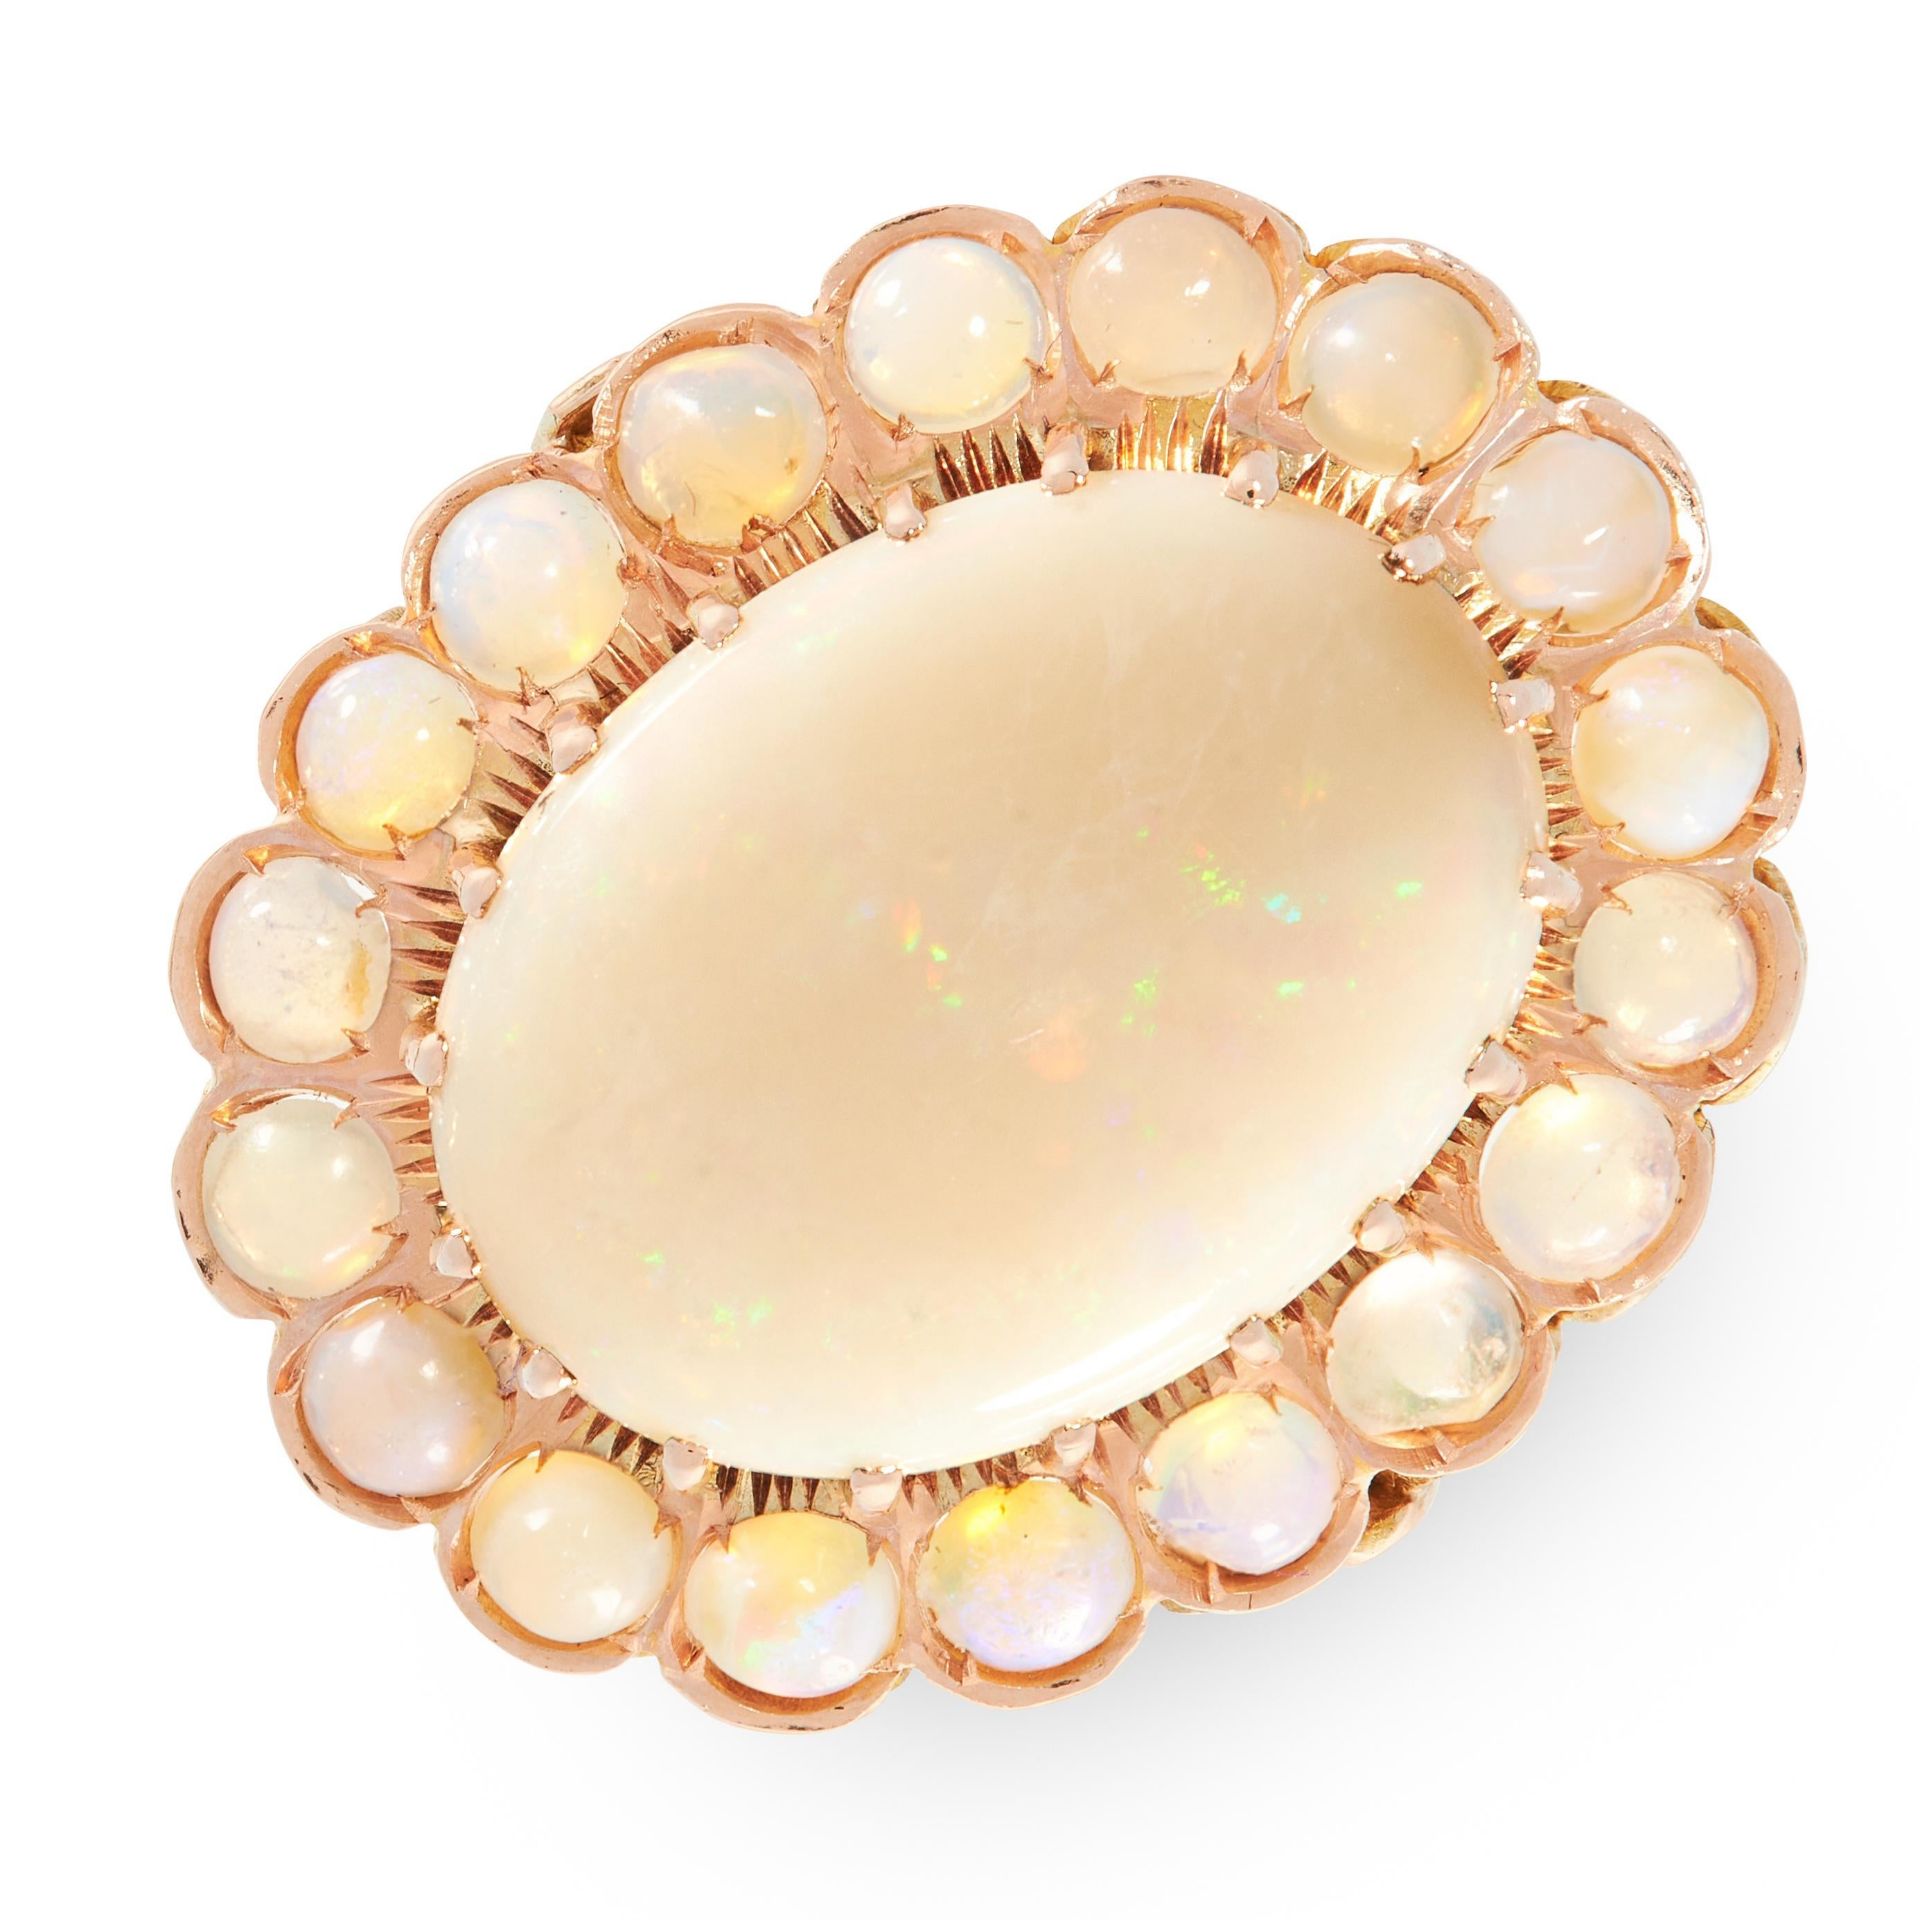 AN OPAL COCKTAIL RING in 18ct yellow gold, set with a central cabochon opal of 4.67 carats within